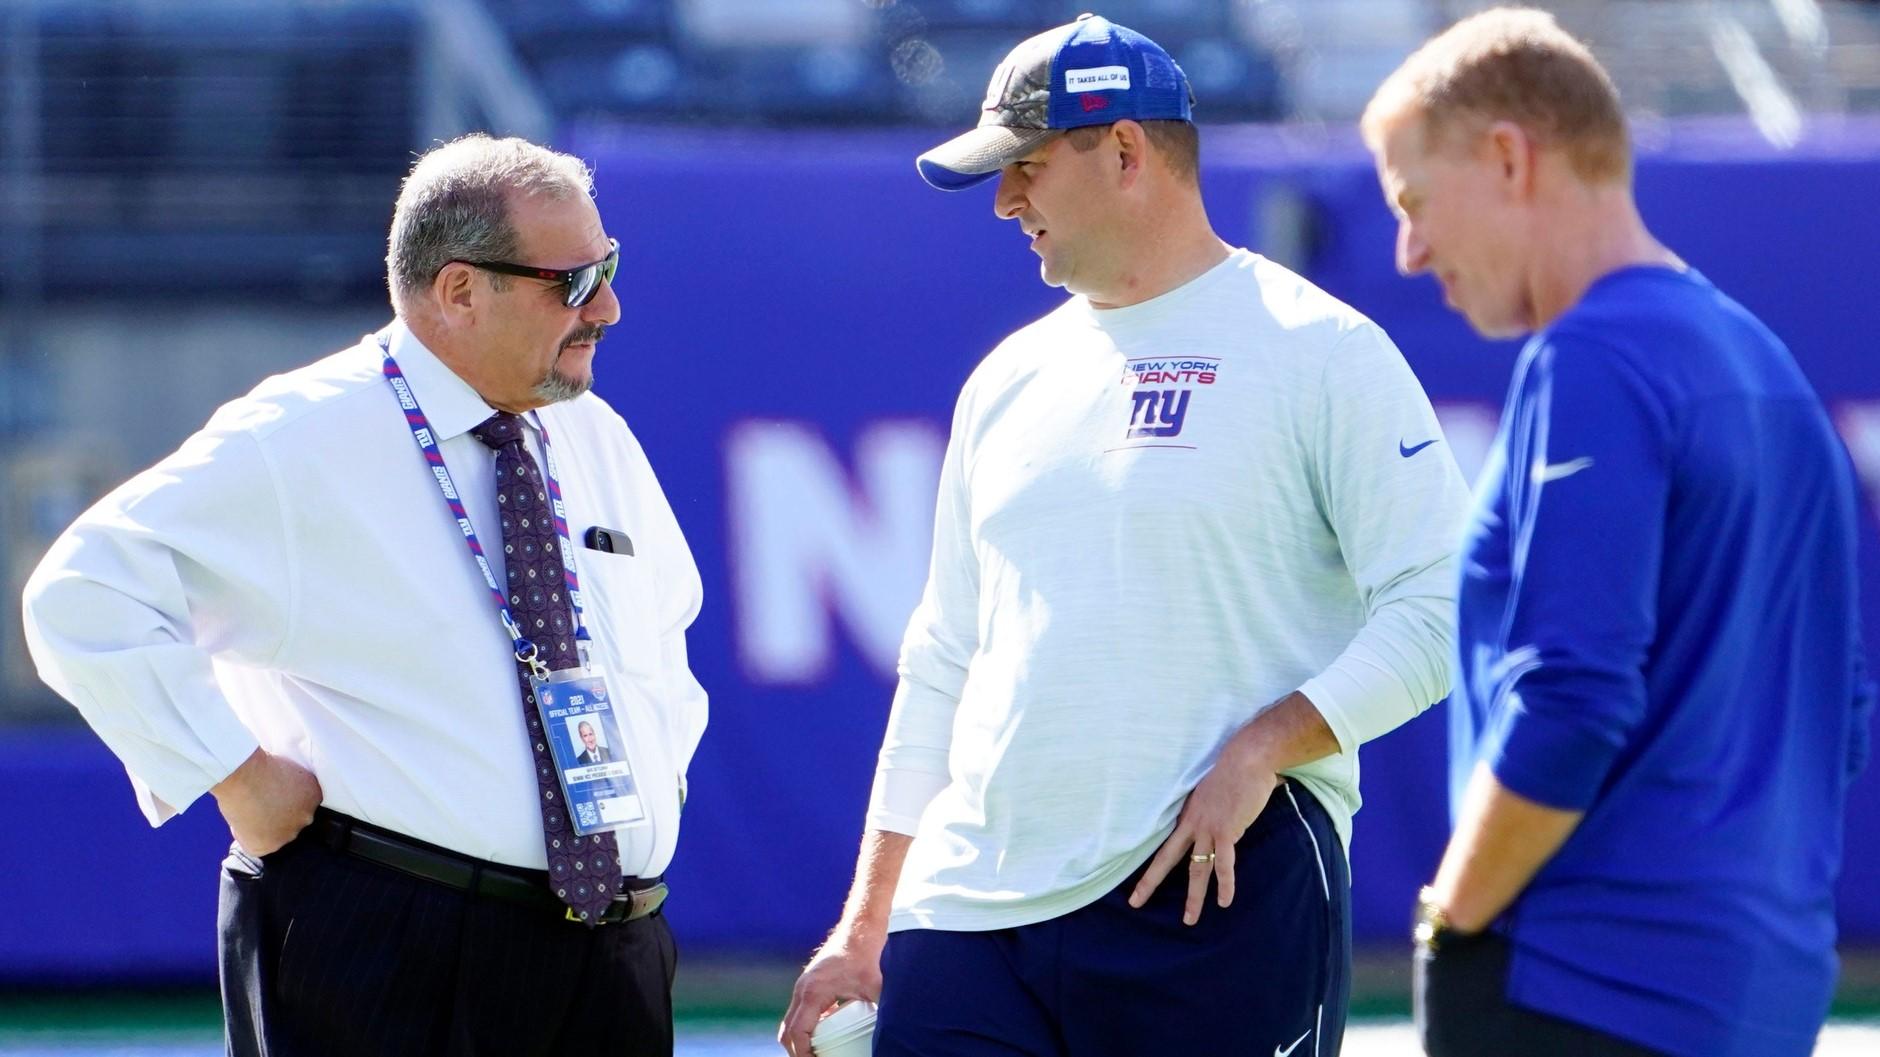 (from left) New York Giants general manager Dave Gettleman, head coach Joe Judge, and offensive coordinator Jason Garrett on the field before the game at MetLife Stadium on Sunday, Sept. 26, 2021, in East Rutherford. / Danielle Parhizkaran/NorthJersey.com